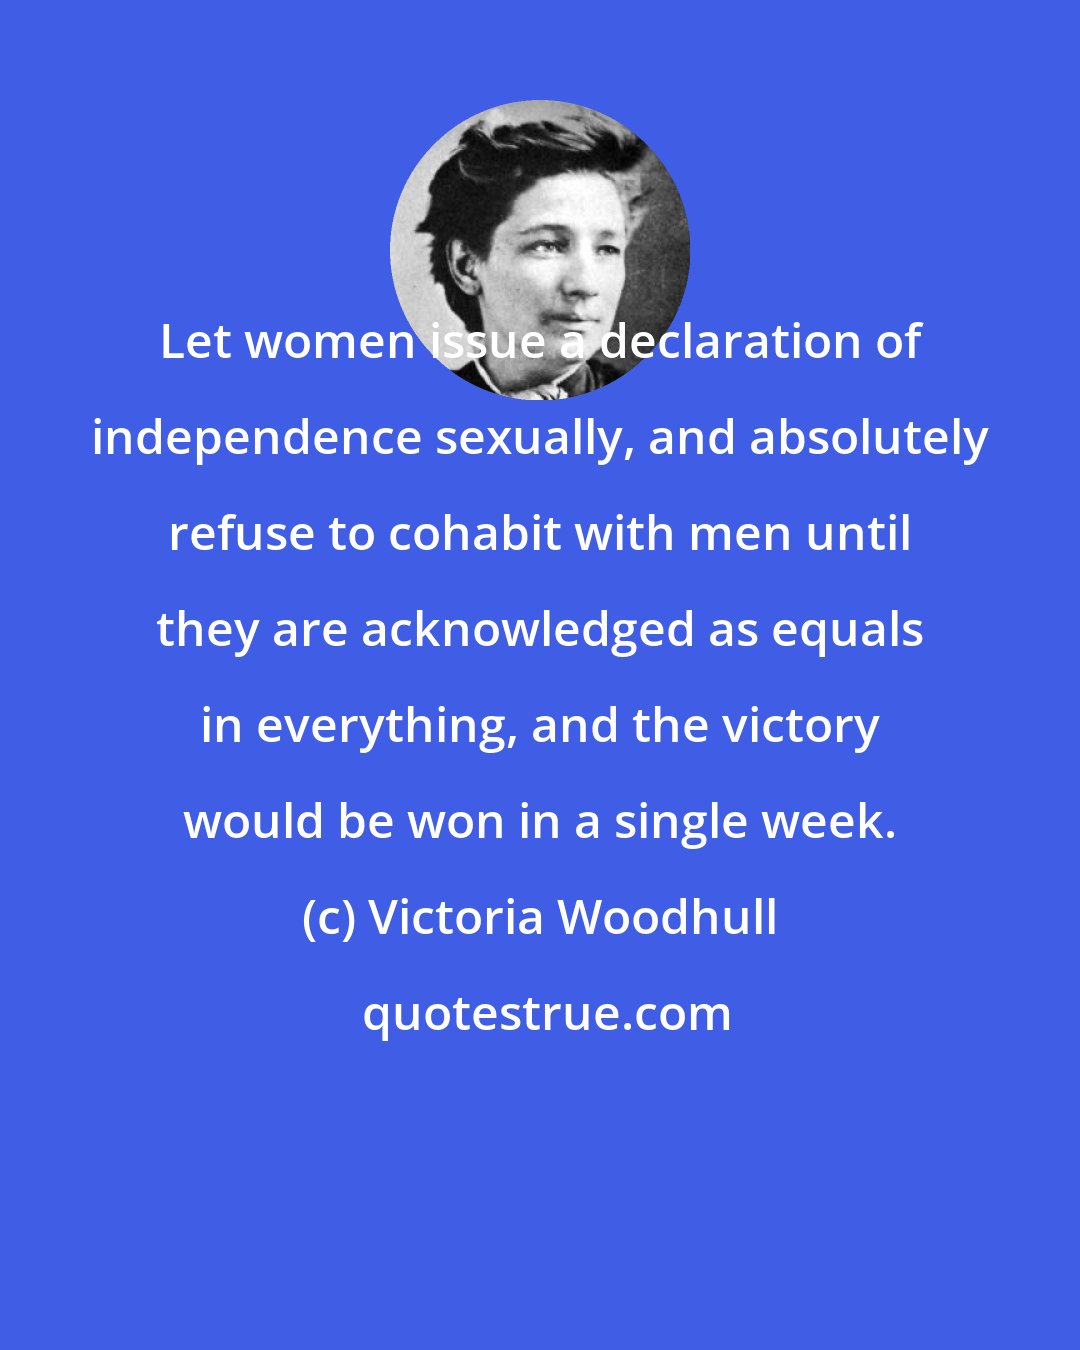 Victoria Woodhull: Let women issue a declaration of independence sexually, and absolutely refuse to cohabit with men until they are acknowledged as equals in everything, and the victory would be won in a single week.